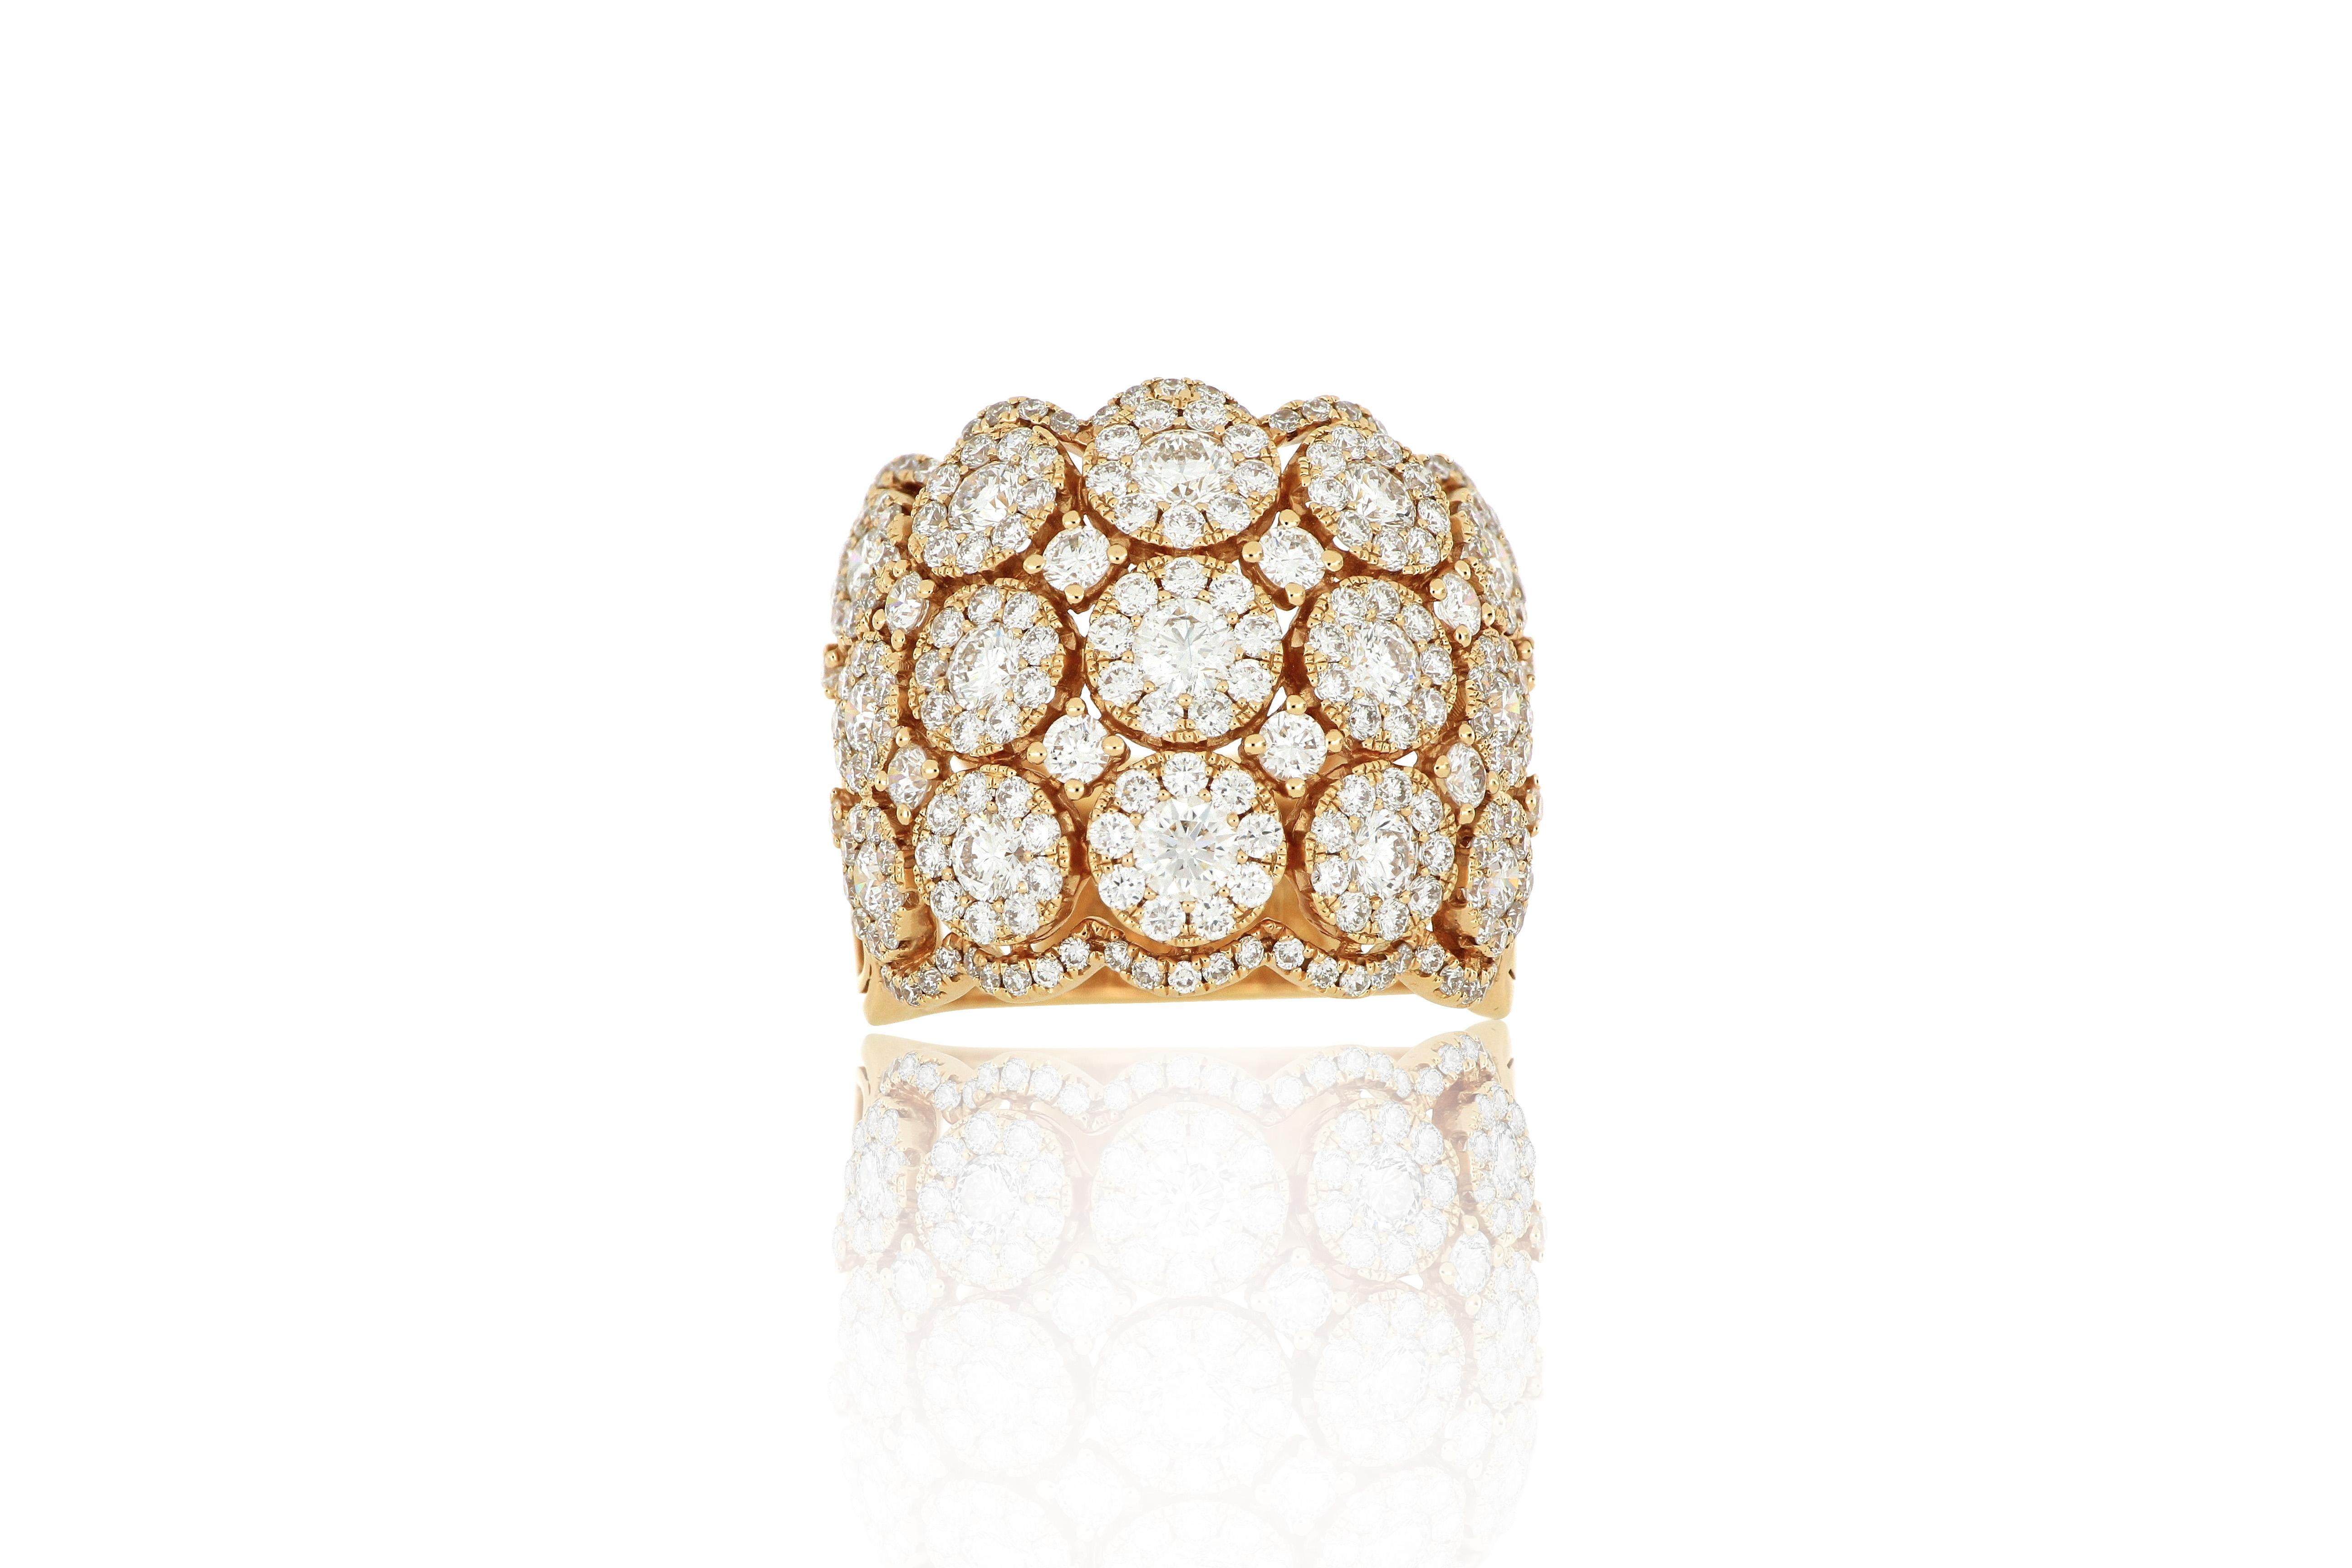 A diamond ring, composed of  clusters of brilliant-cut diamonds weighing approximately 3.46 carats, mounted in 18 Karat rose gold.
A beautiful ring which can be worn for any occasion. 
O’Che 1867 is renowned for its high jewellery collections with